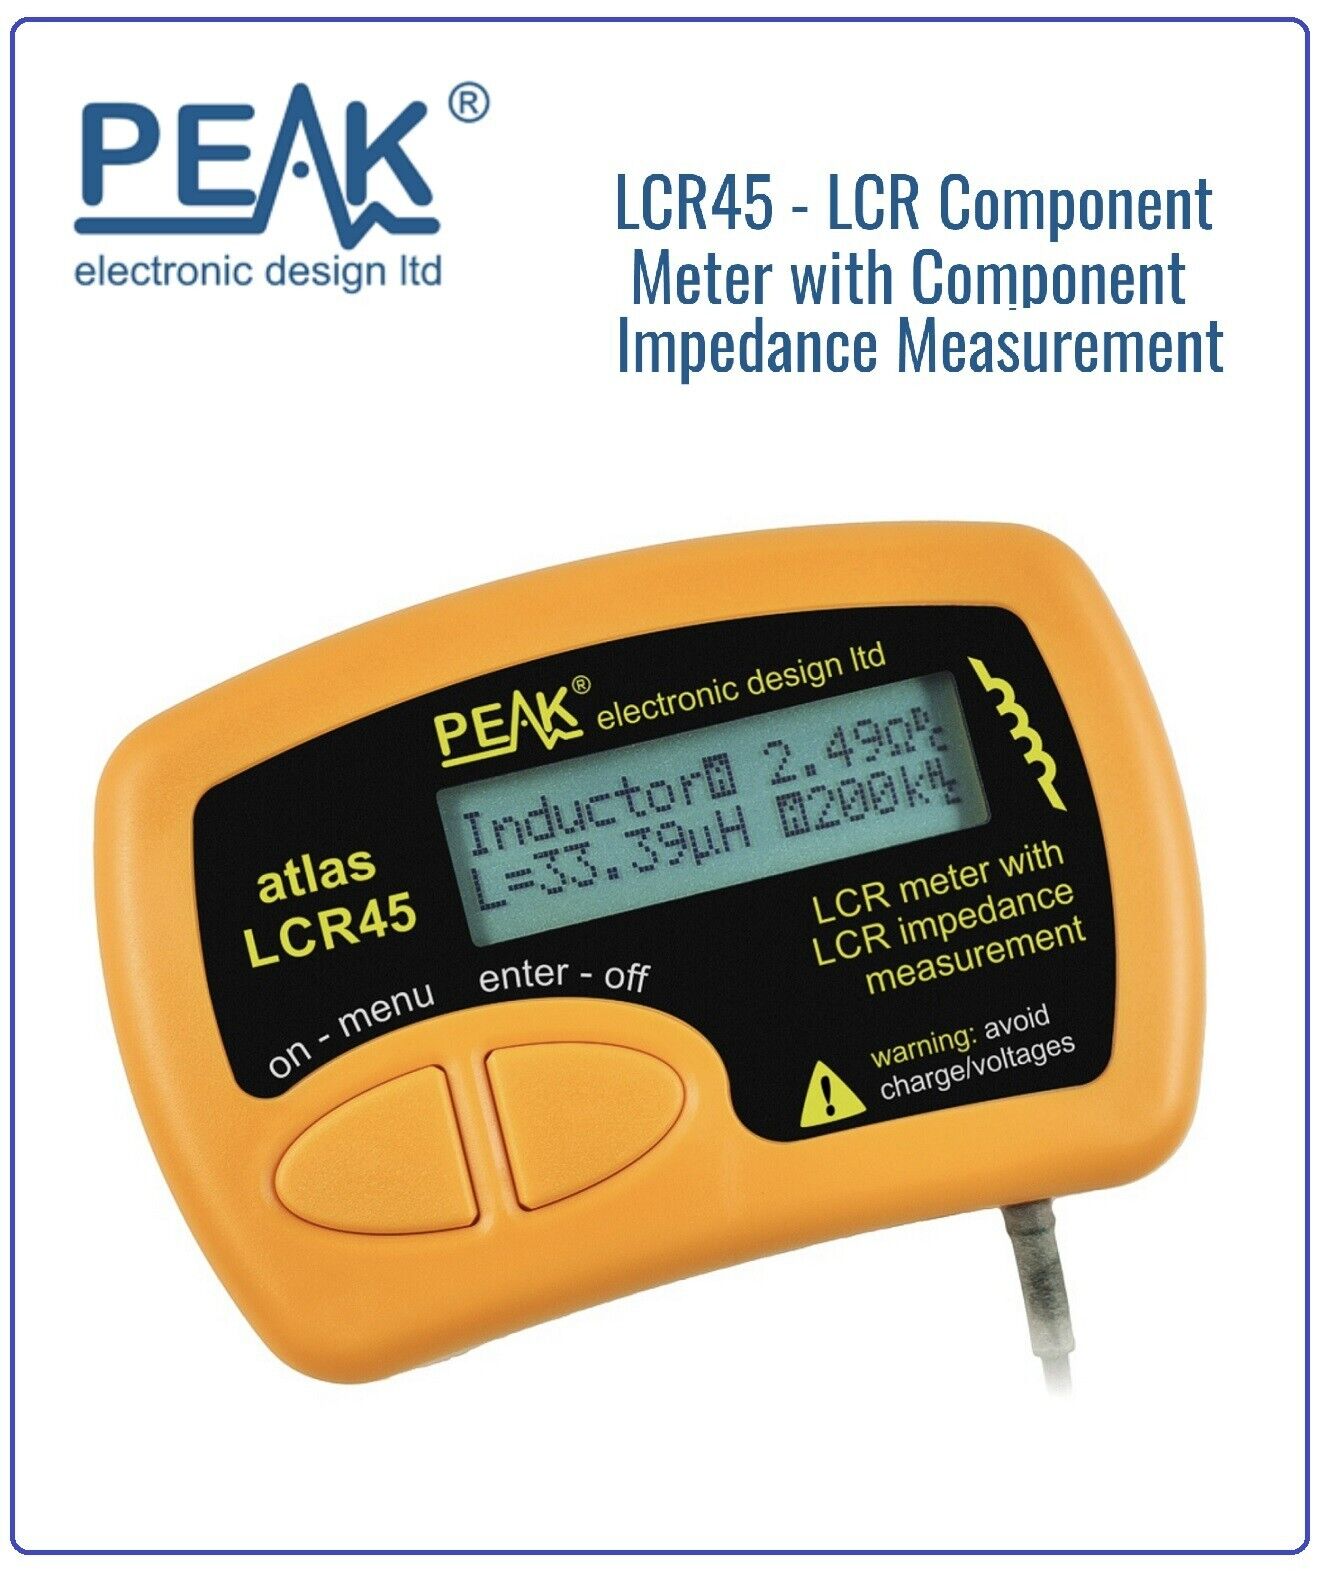 Atlas LCR45 LCR meter with LCR impedance measurement